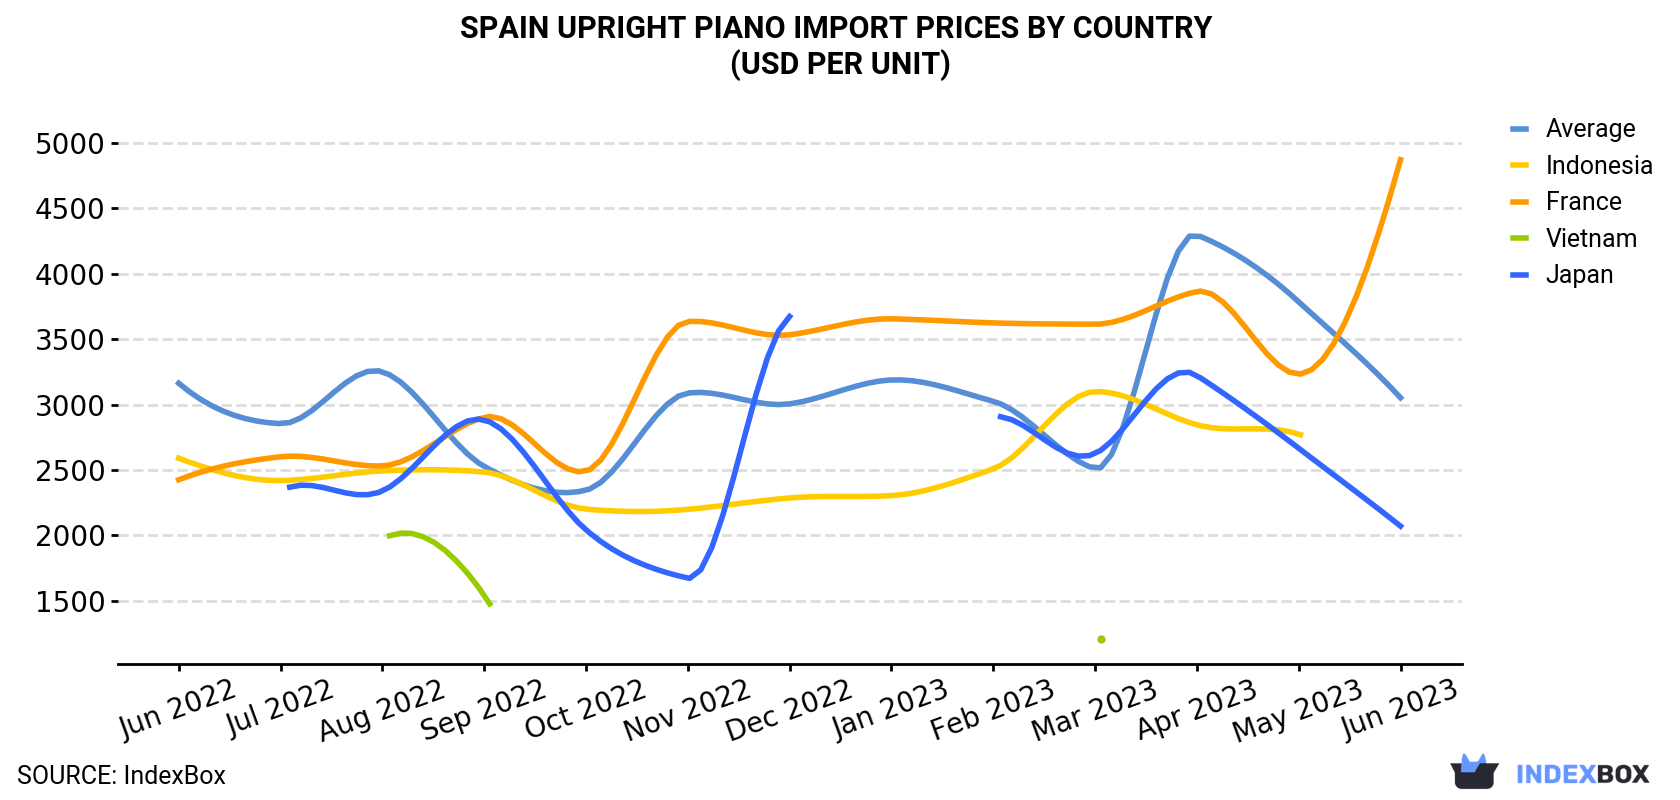 Spain Upright Piano Import Prices By Country (USD Per Unit)